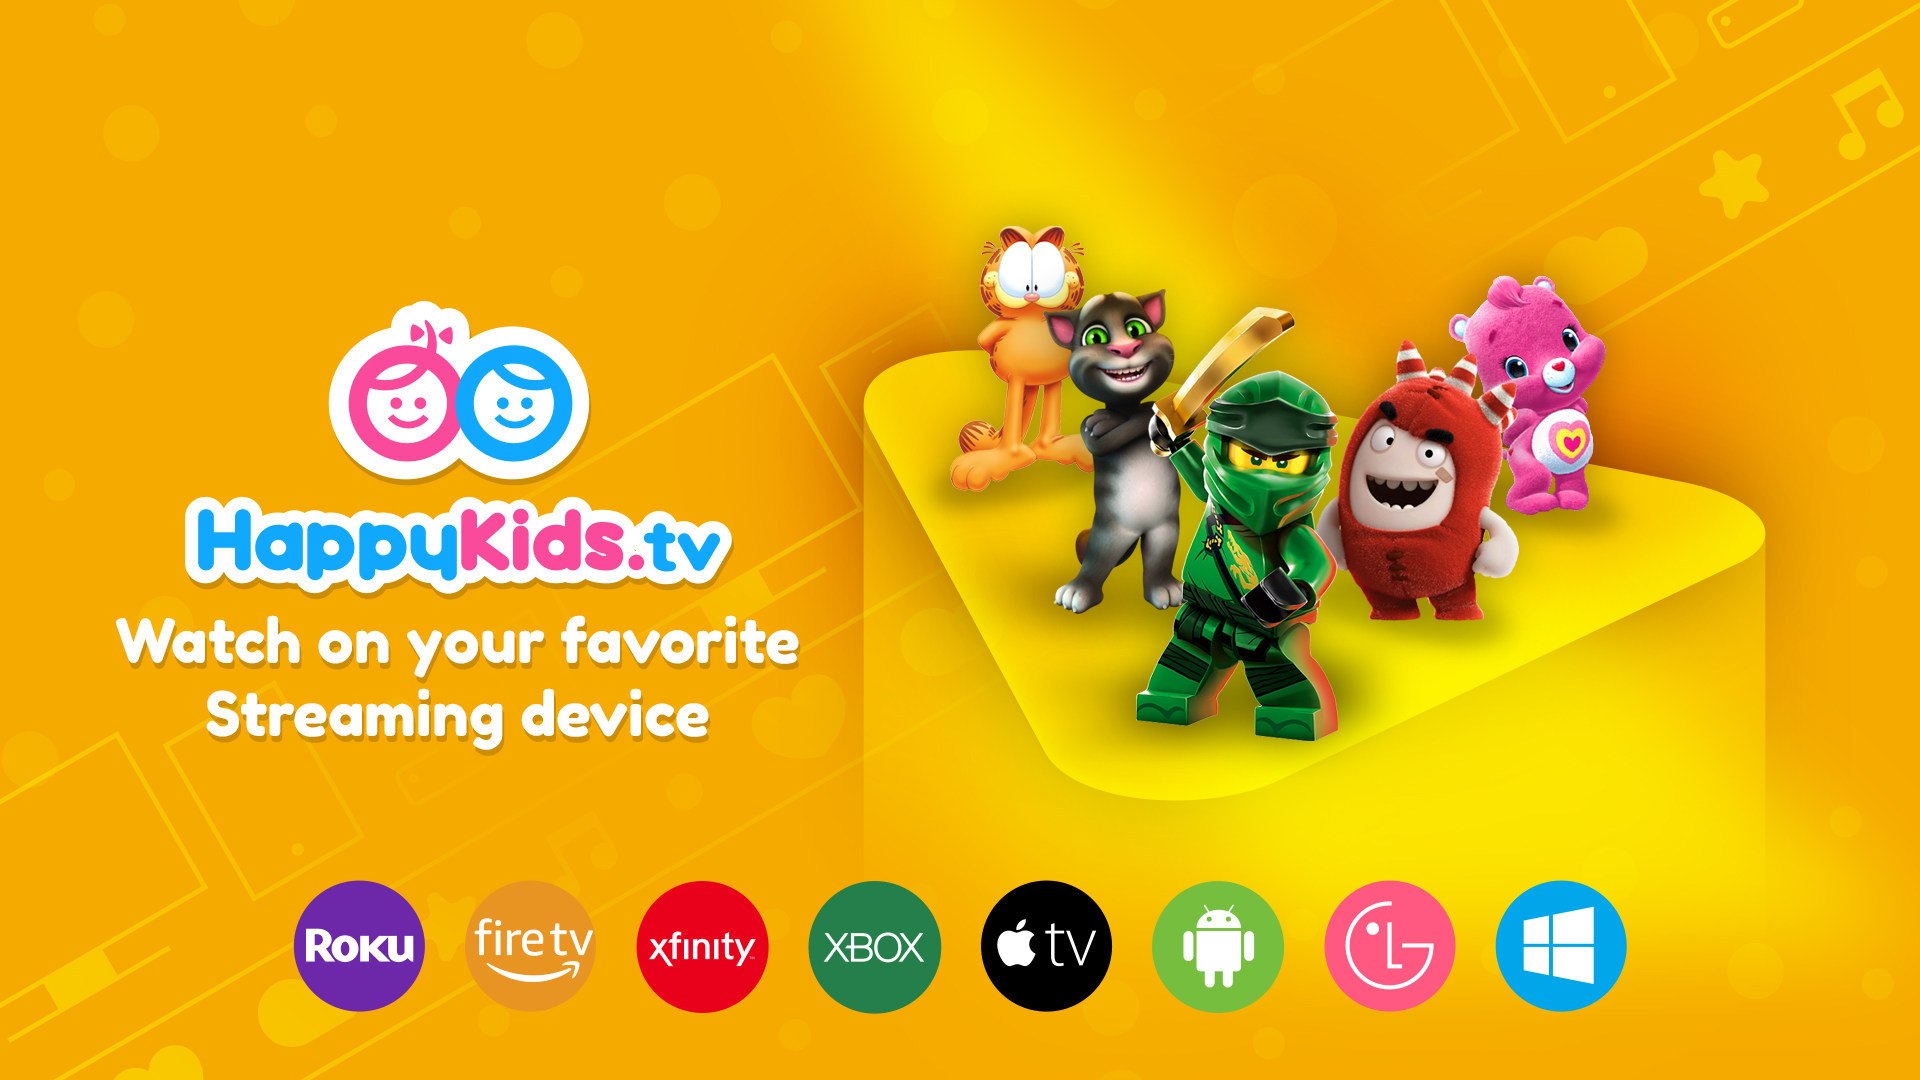 HappyKids.tv Reaches Over 55,000 Kids Movies and Shows